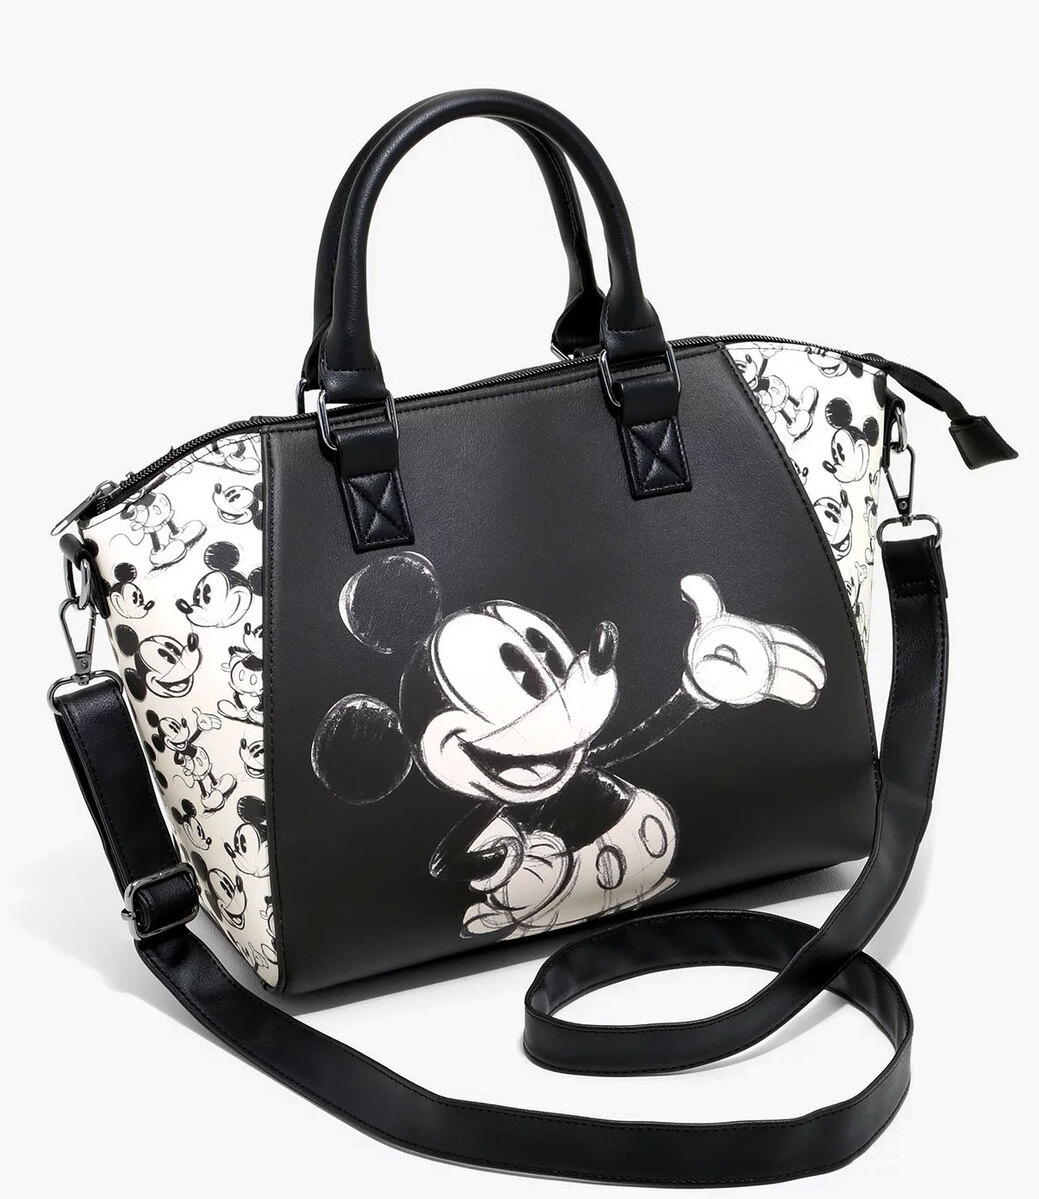 Disney Mickey Mouse Sketch Satchel Bag by Loungefly - New With Tags